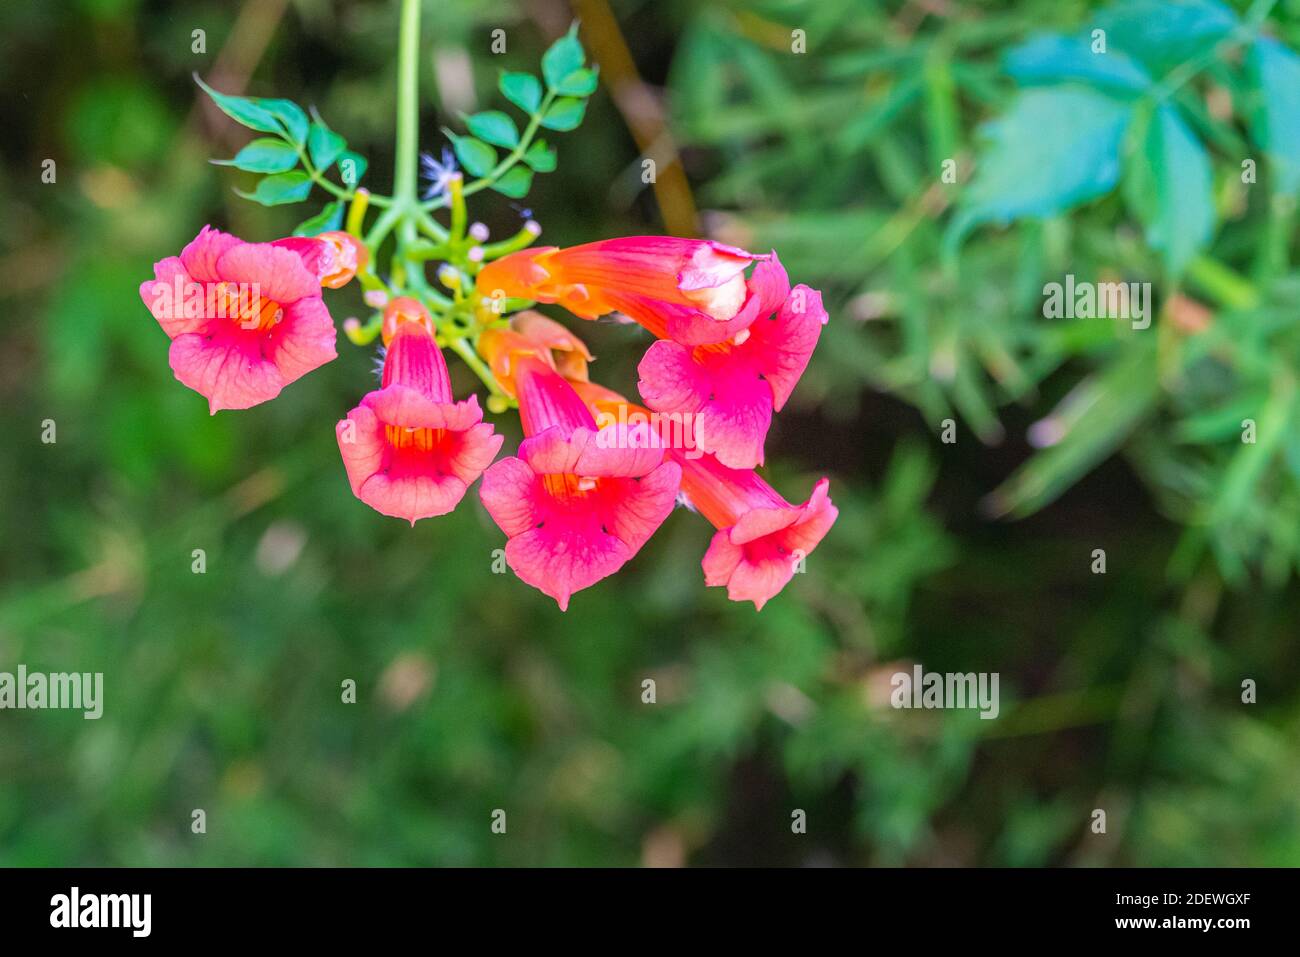 Iochroma coccinea red bells blurred close up of summer flowers. Stock Photo